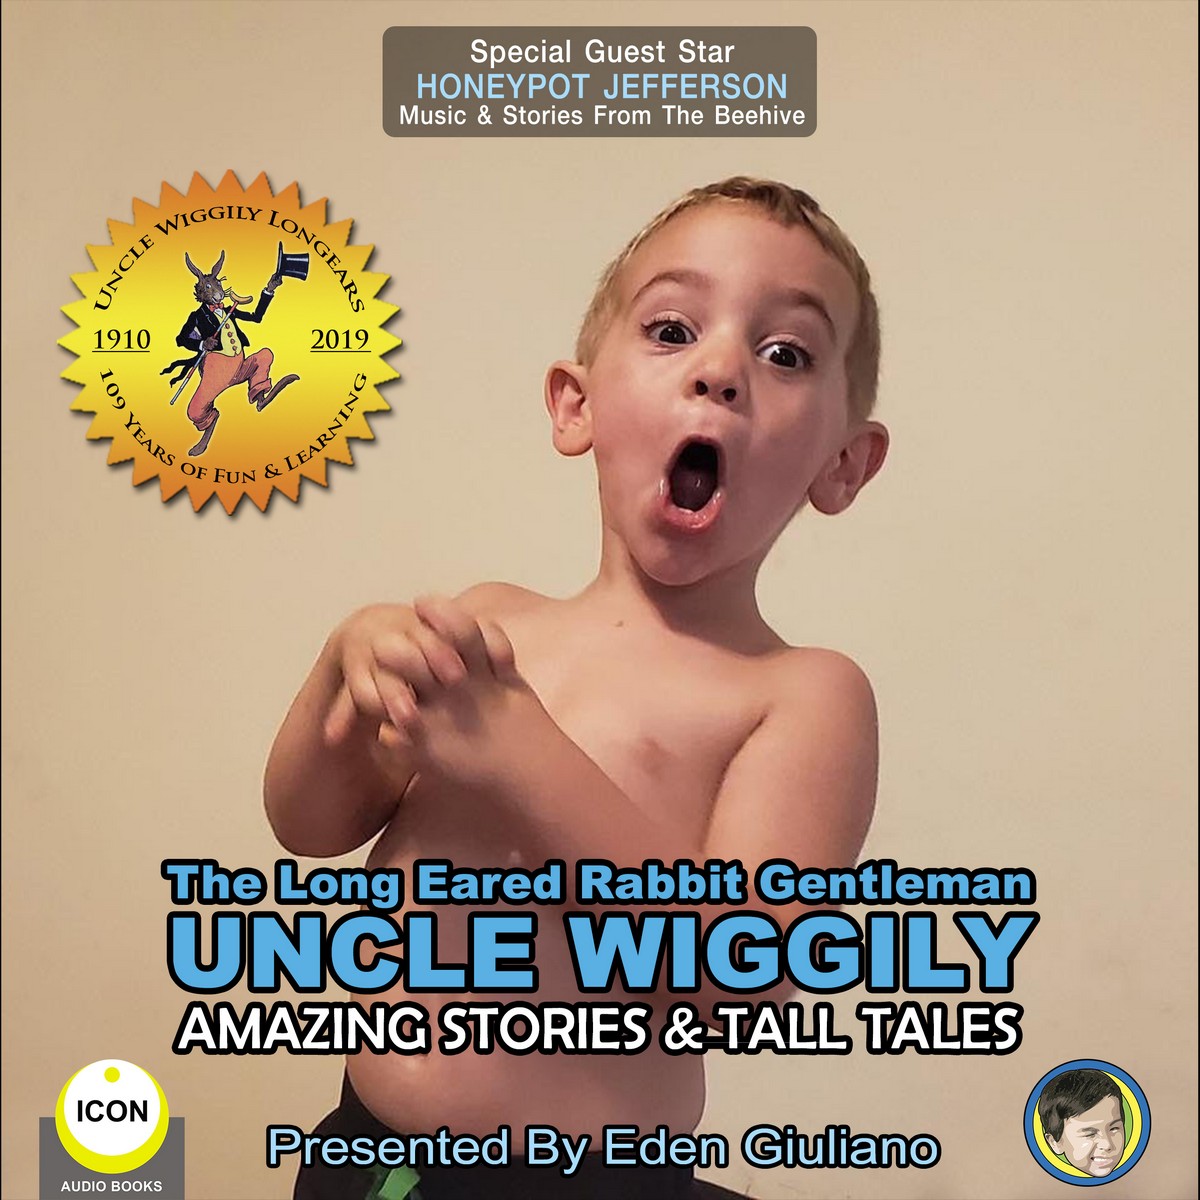 The Long Eared Rabbit Gentleman Uncle Wiggily – Amazing Stories & Tall Tales